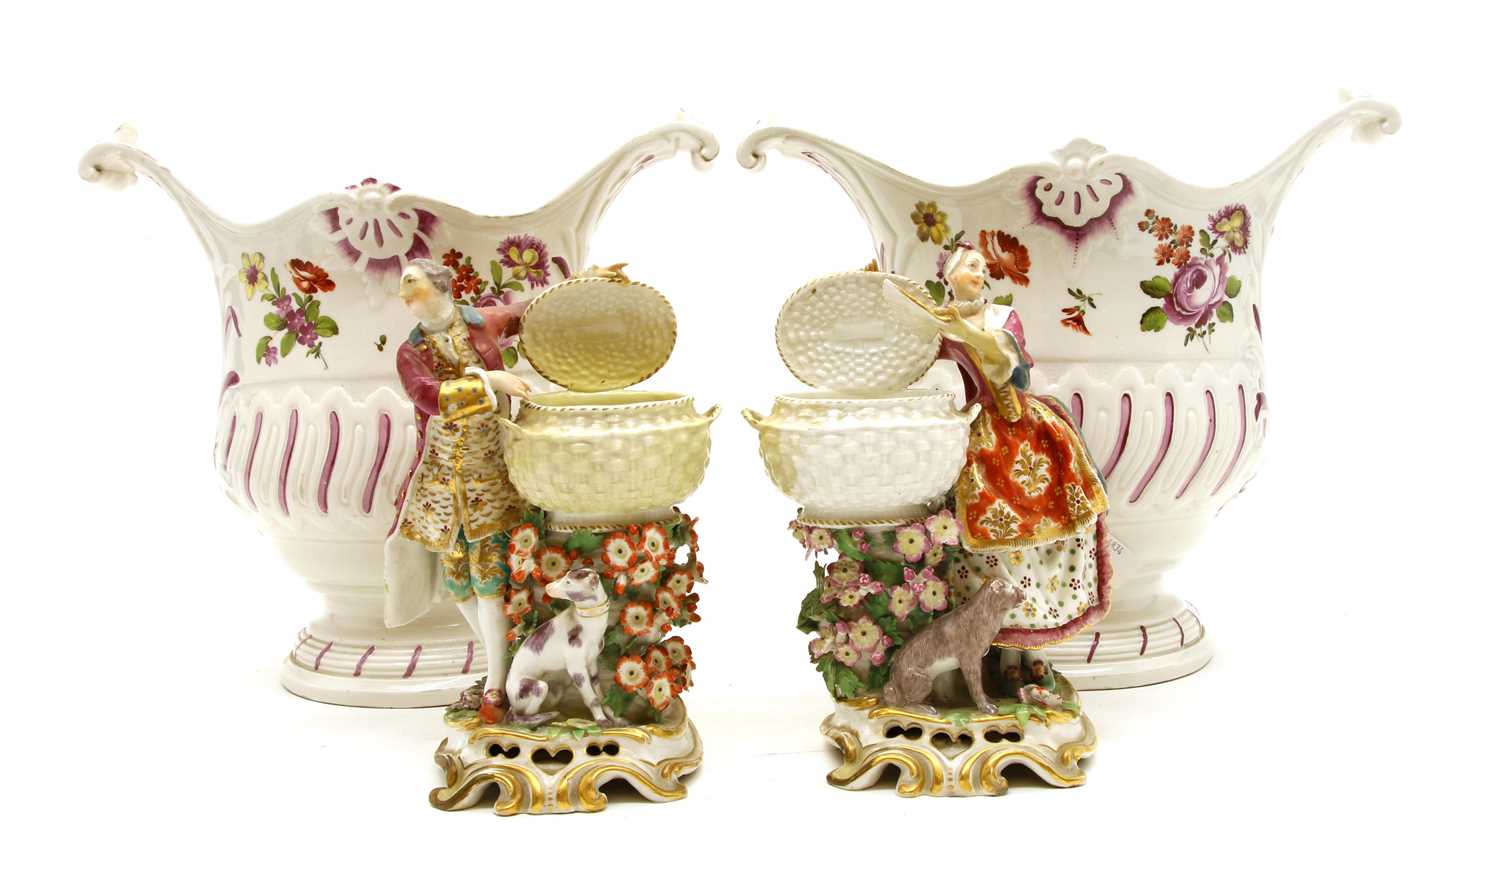 Lot 205 - A pair of 19th century Continental porcelain figure groups